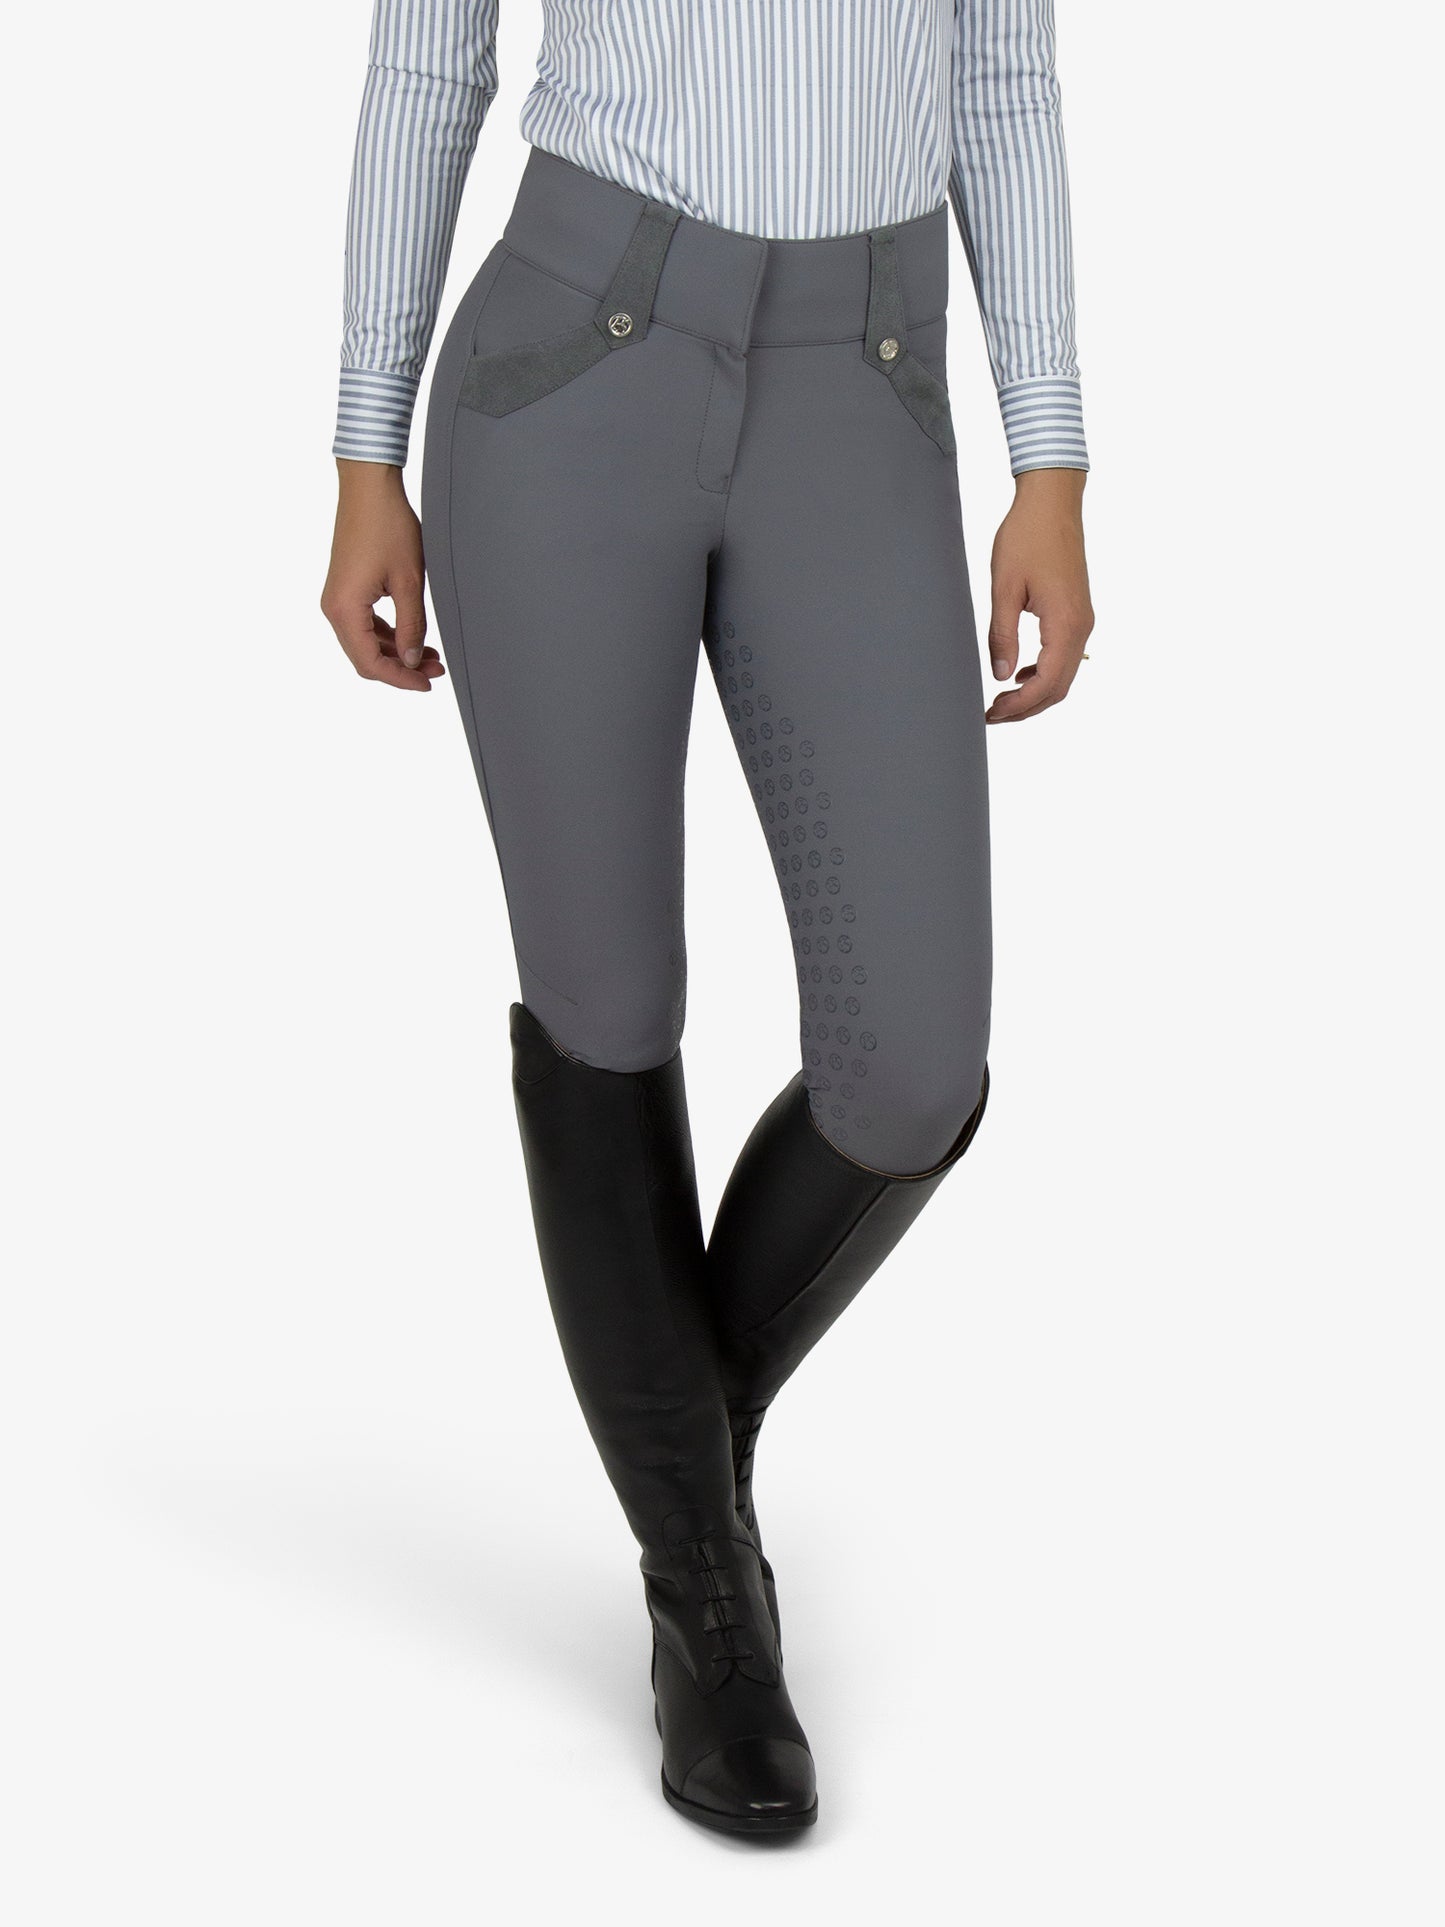 PS of Sweden Breeches Karen | Anthracite or Chocolate